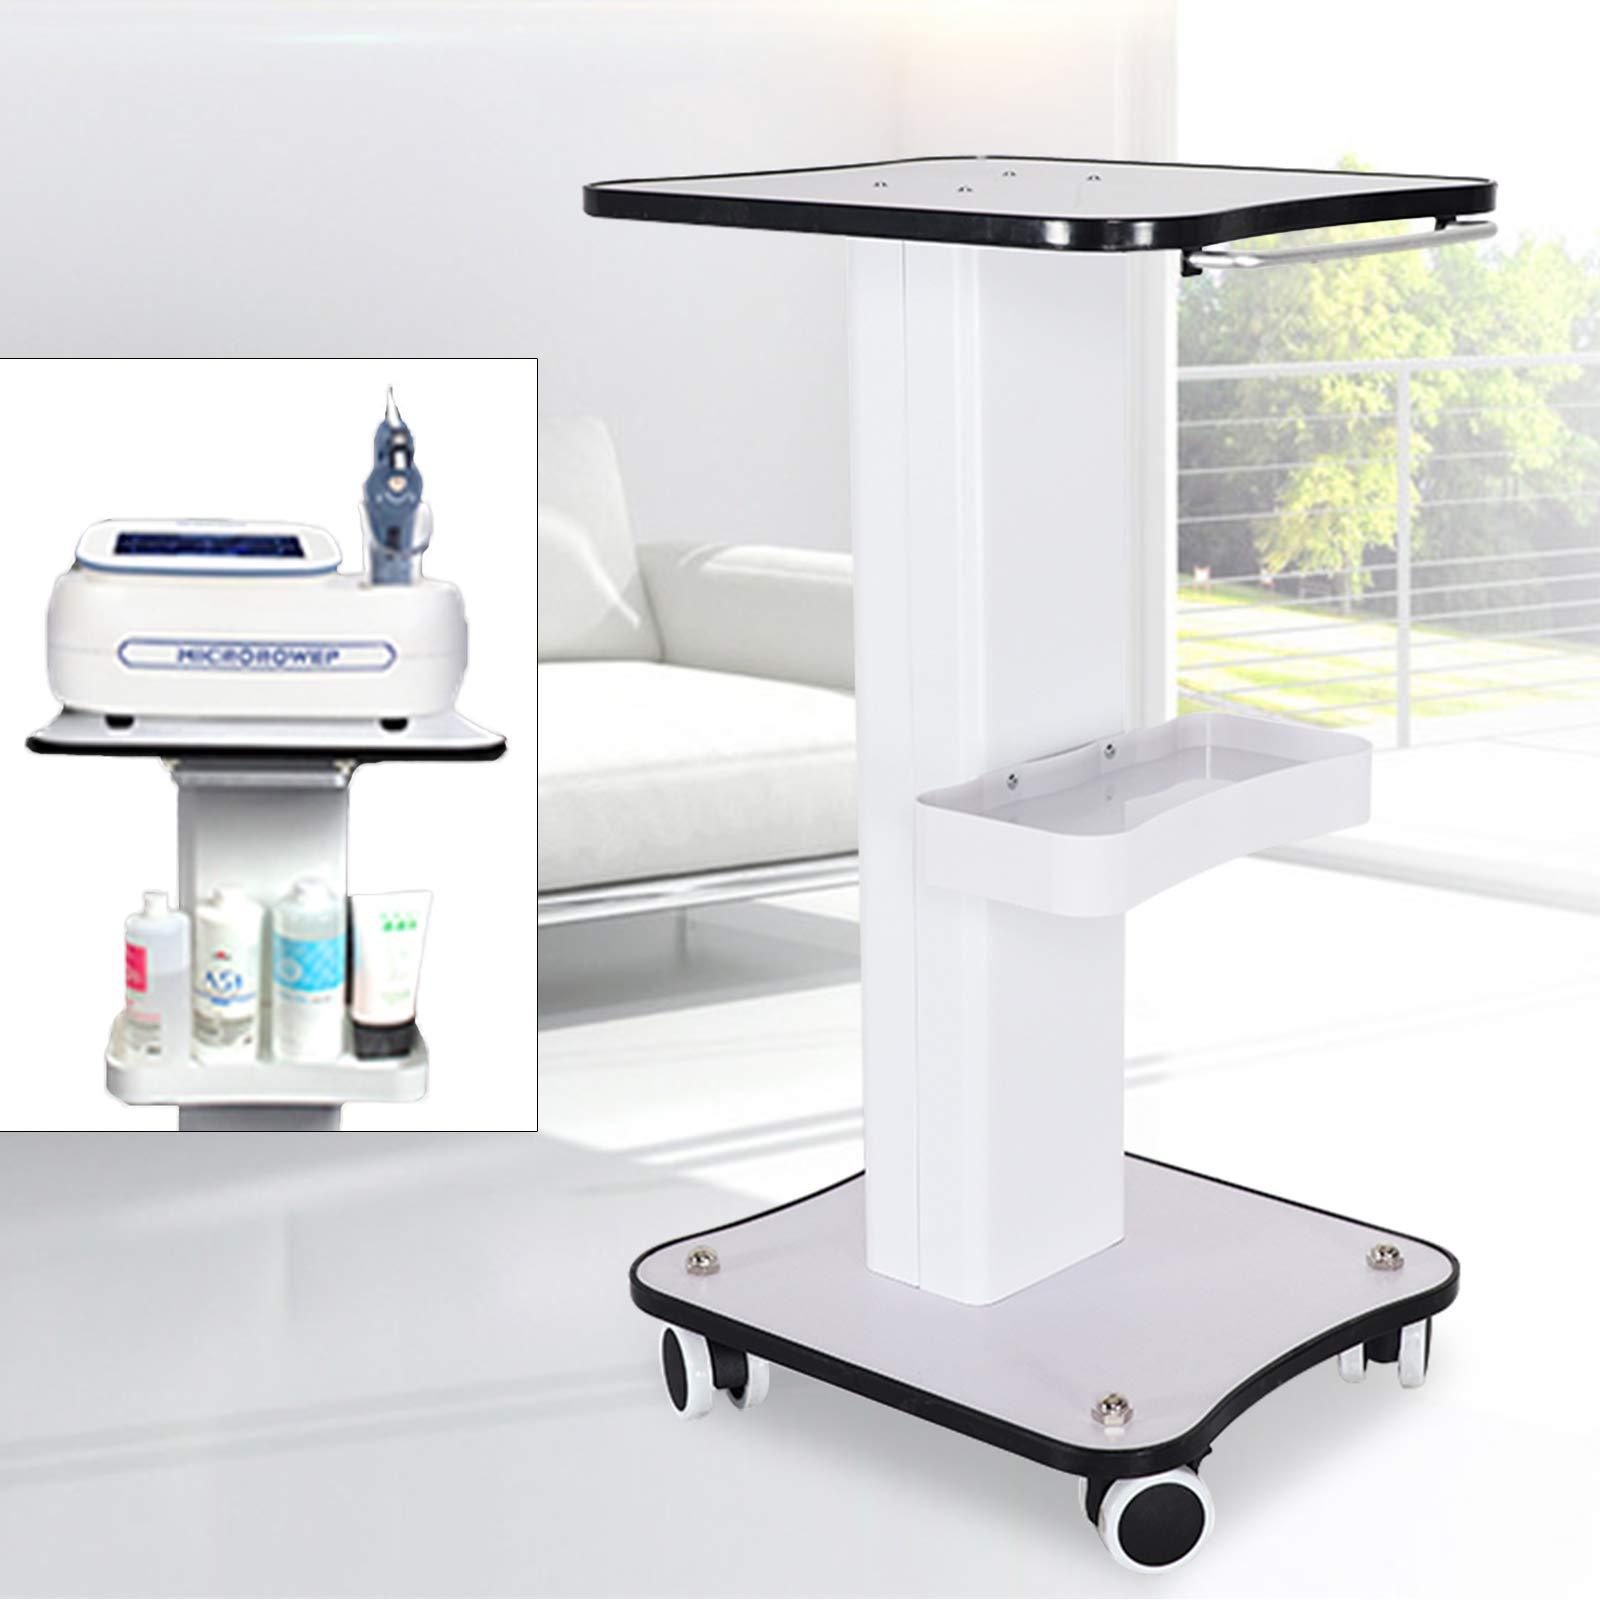  Beauty Salon Trolley Stand-Beauty Rolling Cart-SPA Instrument Storage Tray-with Wheel Large Load-Salon Big Table Trolley Stand